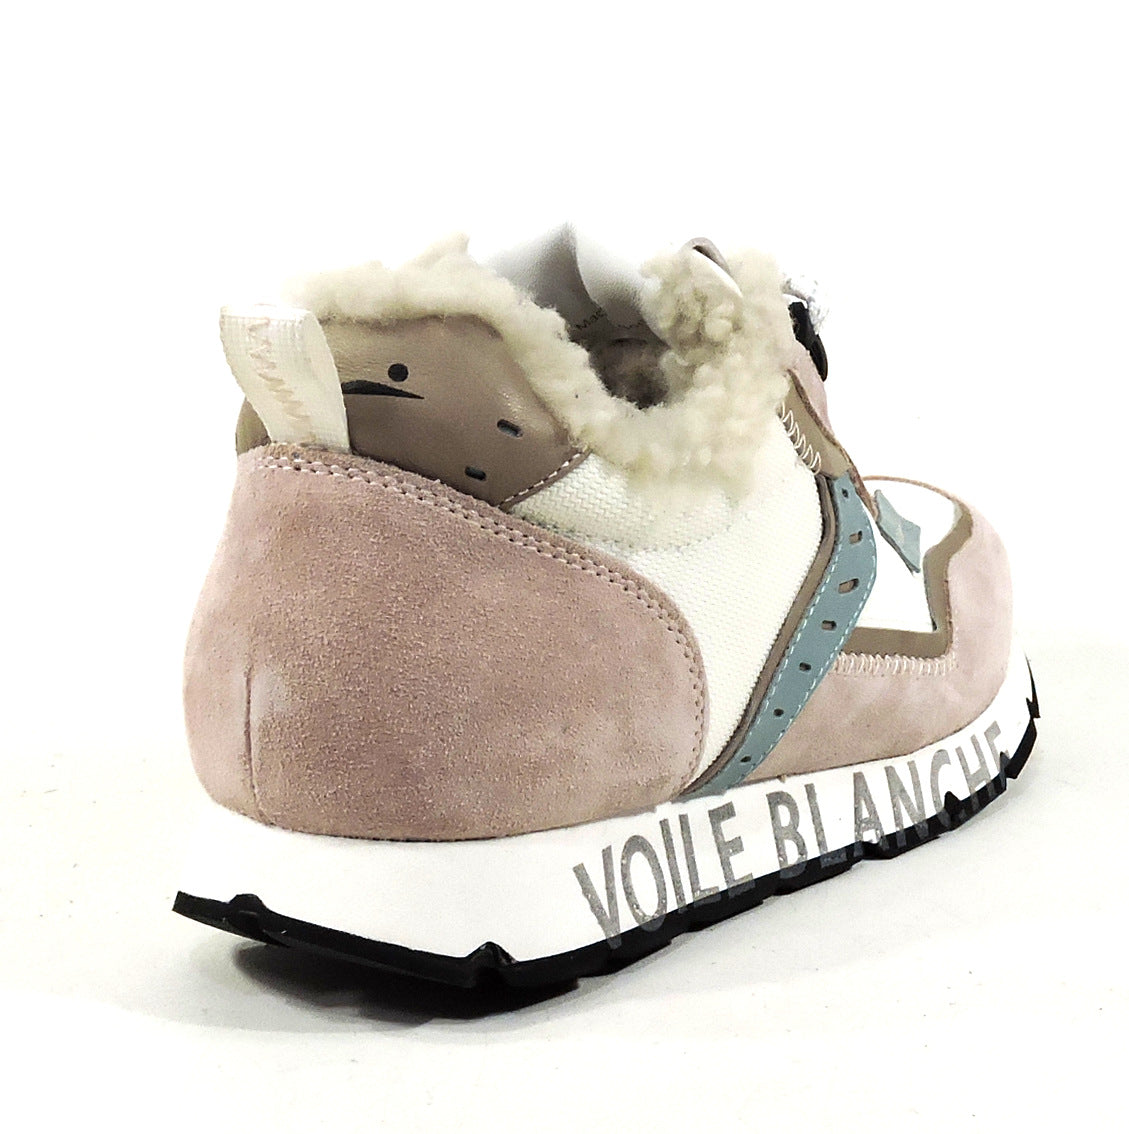 VOILE BLANCHE 🇮🇹 WOMEN'S PINK SUEDE COMFORT FASHION SNEAKERS